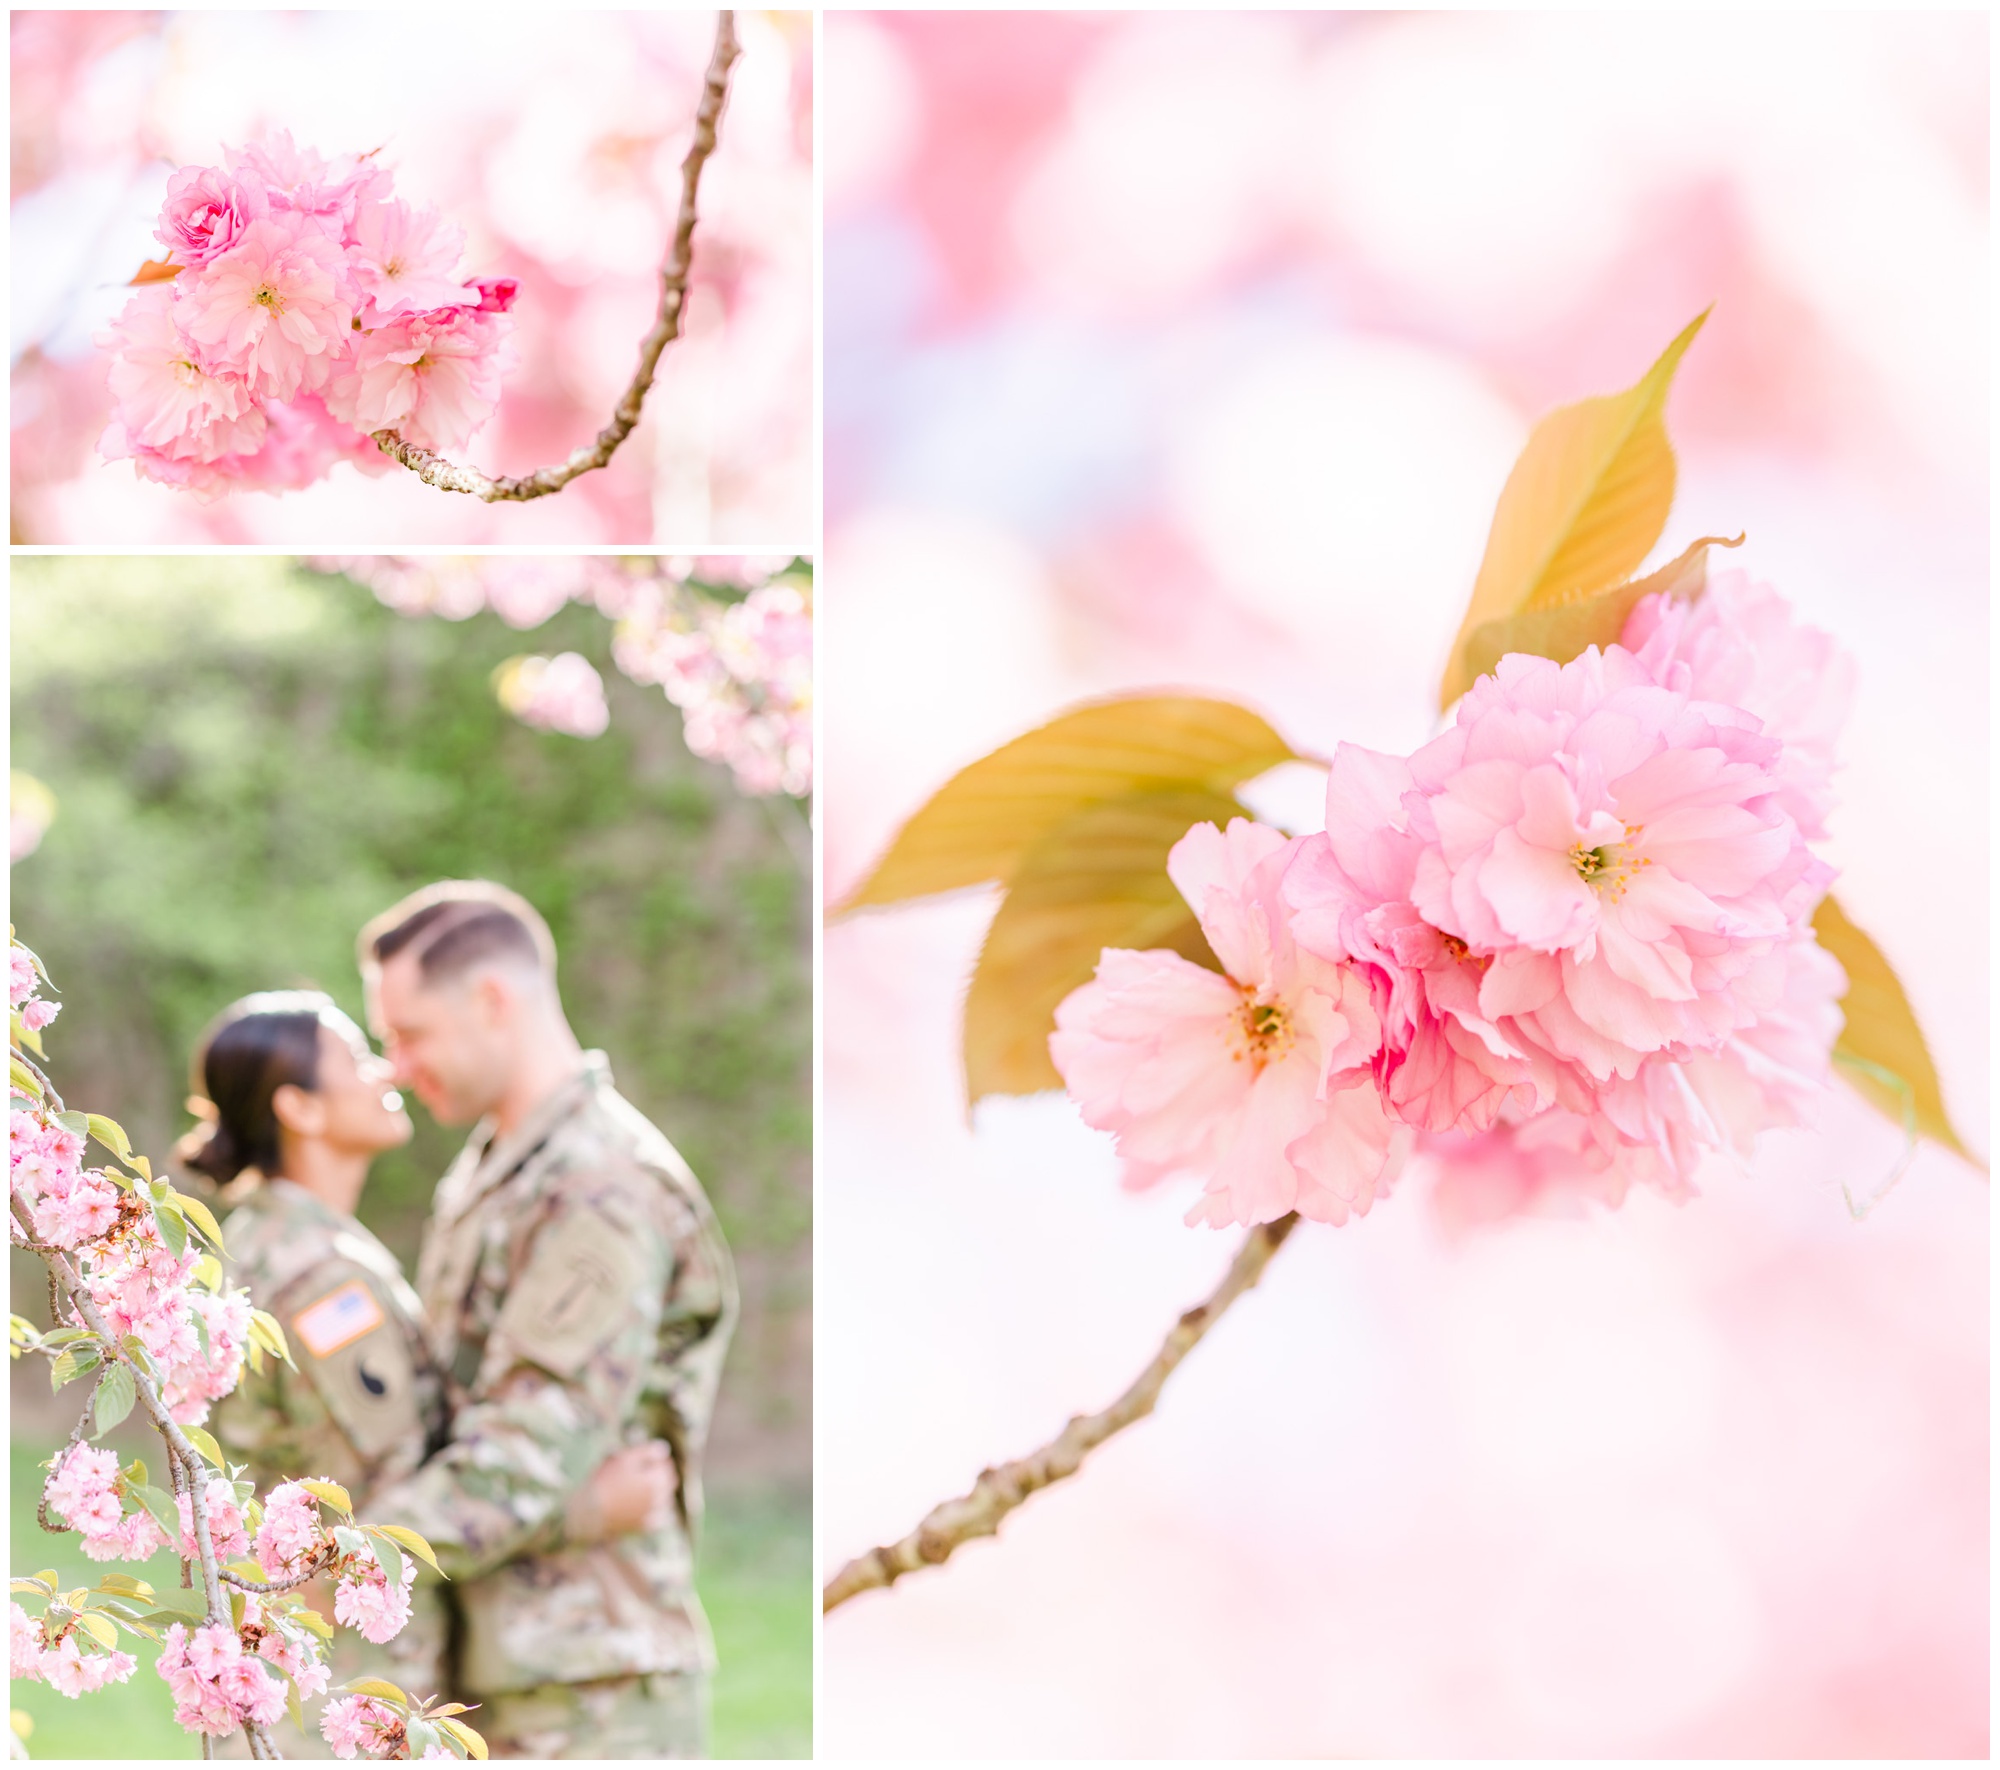 kwanzan cherry blossom photos, D.C. cherry blossoms, alternative cherry blossoms, flowering trees, bright pink blossoms, fluffy pink blossoms, spring portraits, spring photo ideas, Rachel E.H. Photography, military couple almost kissing, military couple hugging, couple behind cherry blossom branch